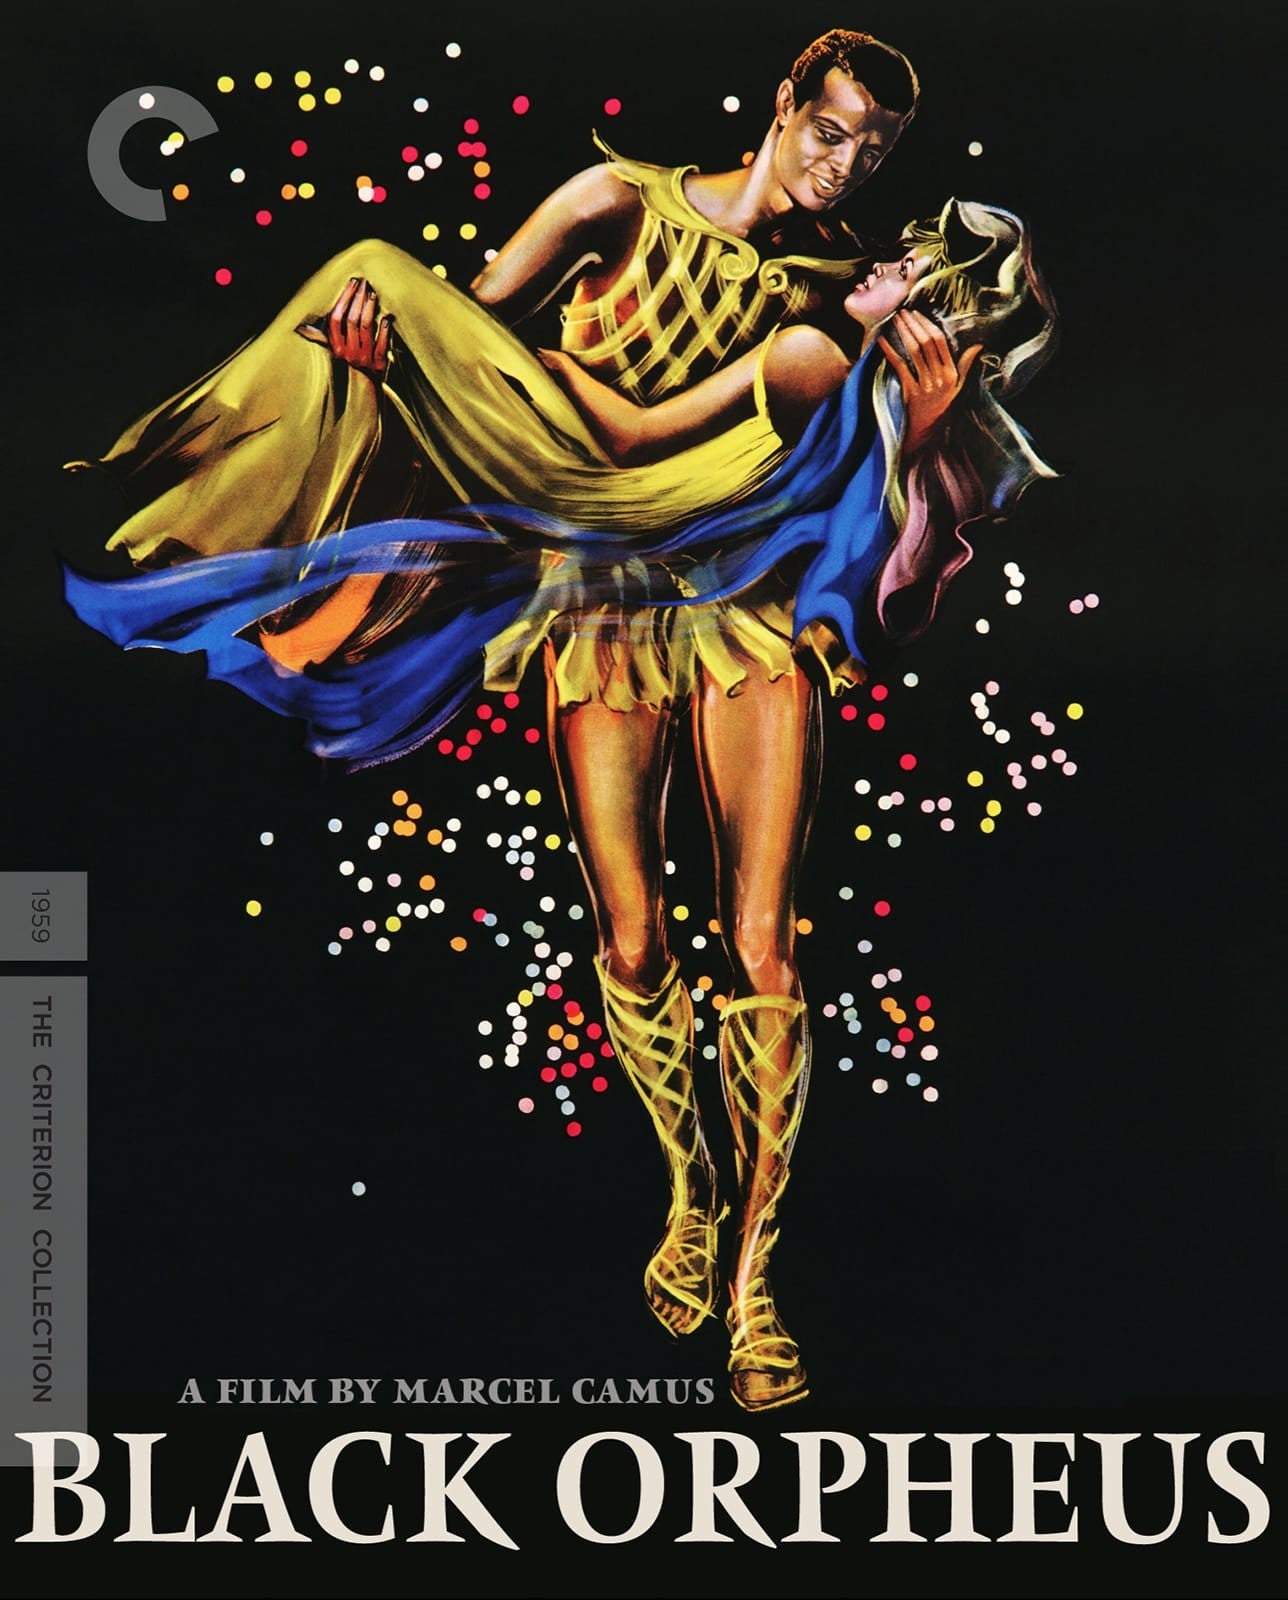 Black Orpheus - Criterion Collection (Blu-ray)